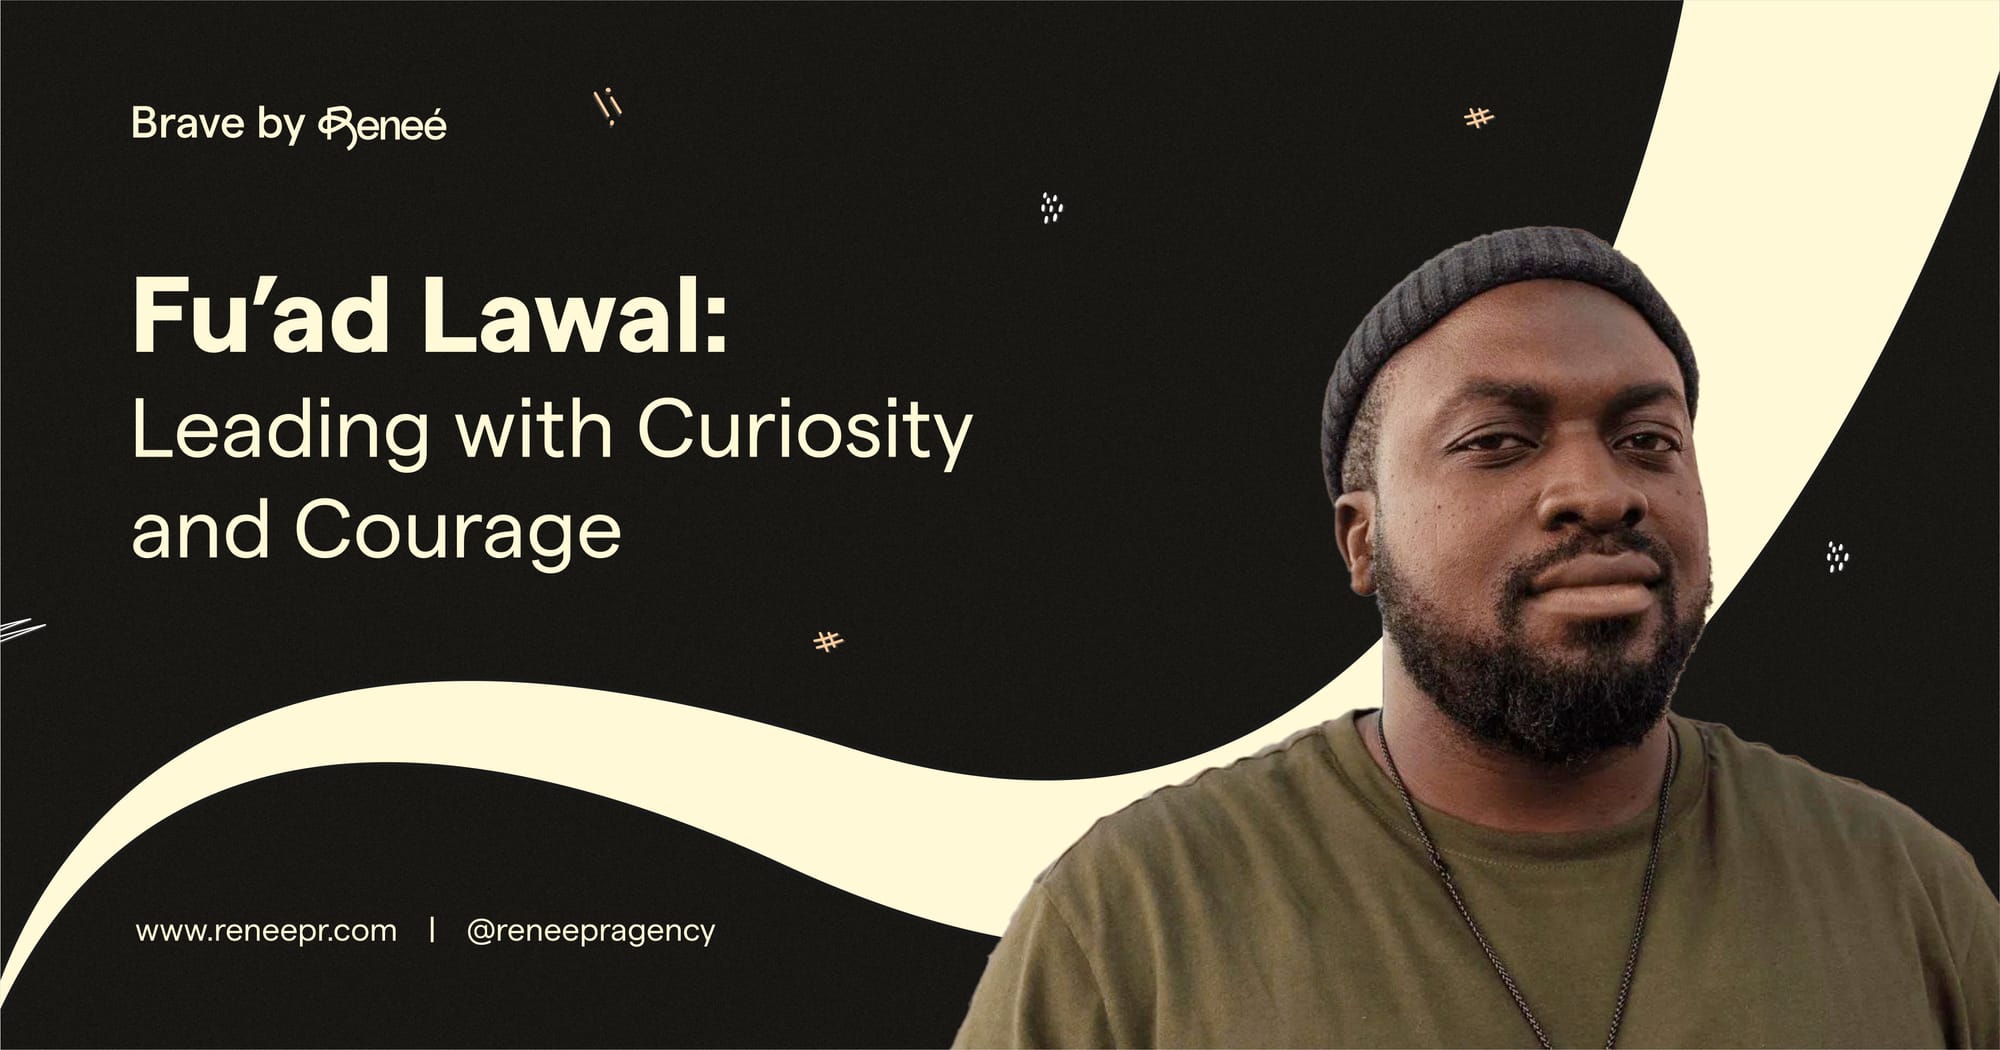 Fu'ad Lawal: leading with Curiosity and Courage